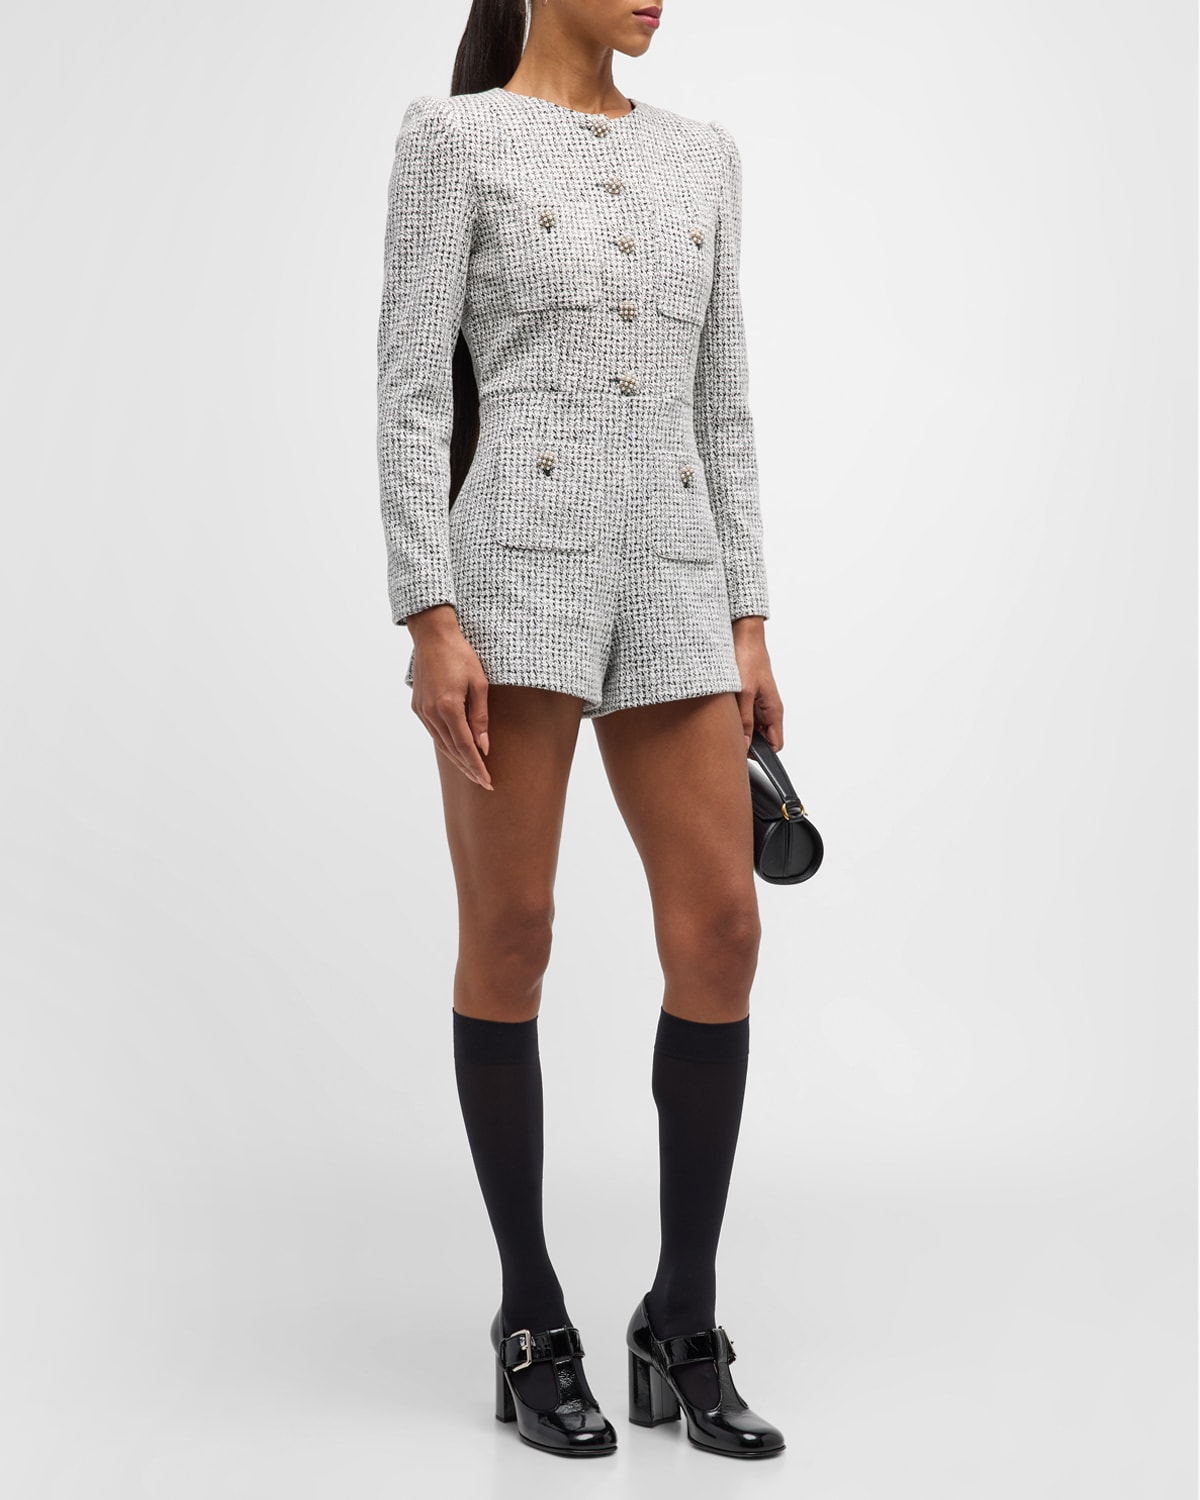 ALICE AND OLIVIA SHILOH BUTTON-FRONT TWEED ROMPER